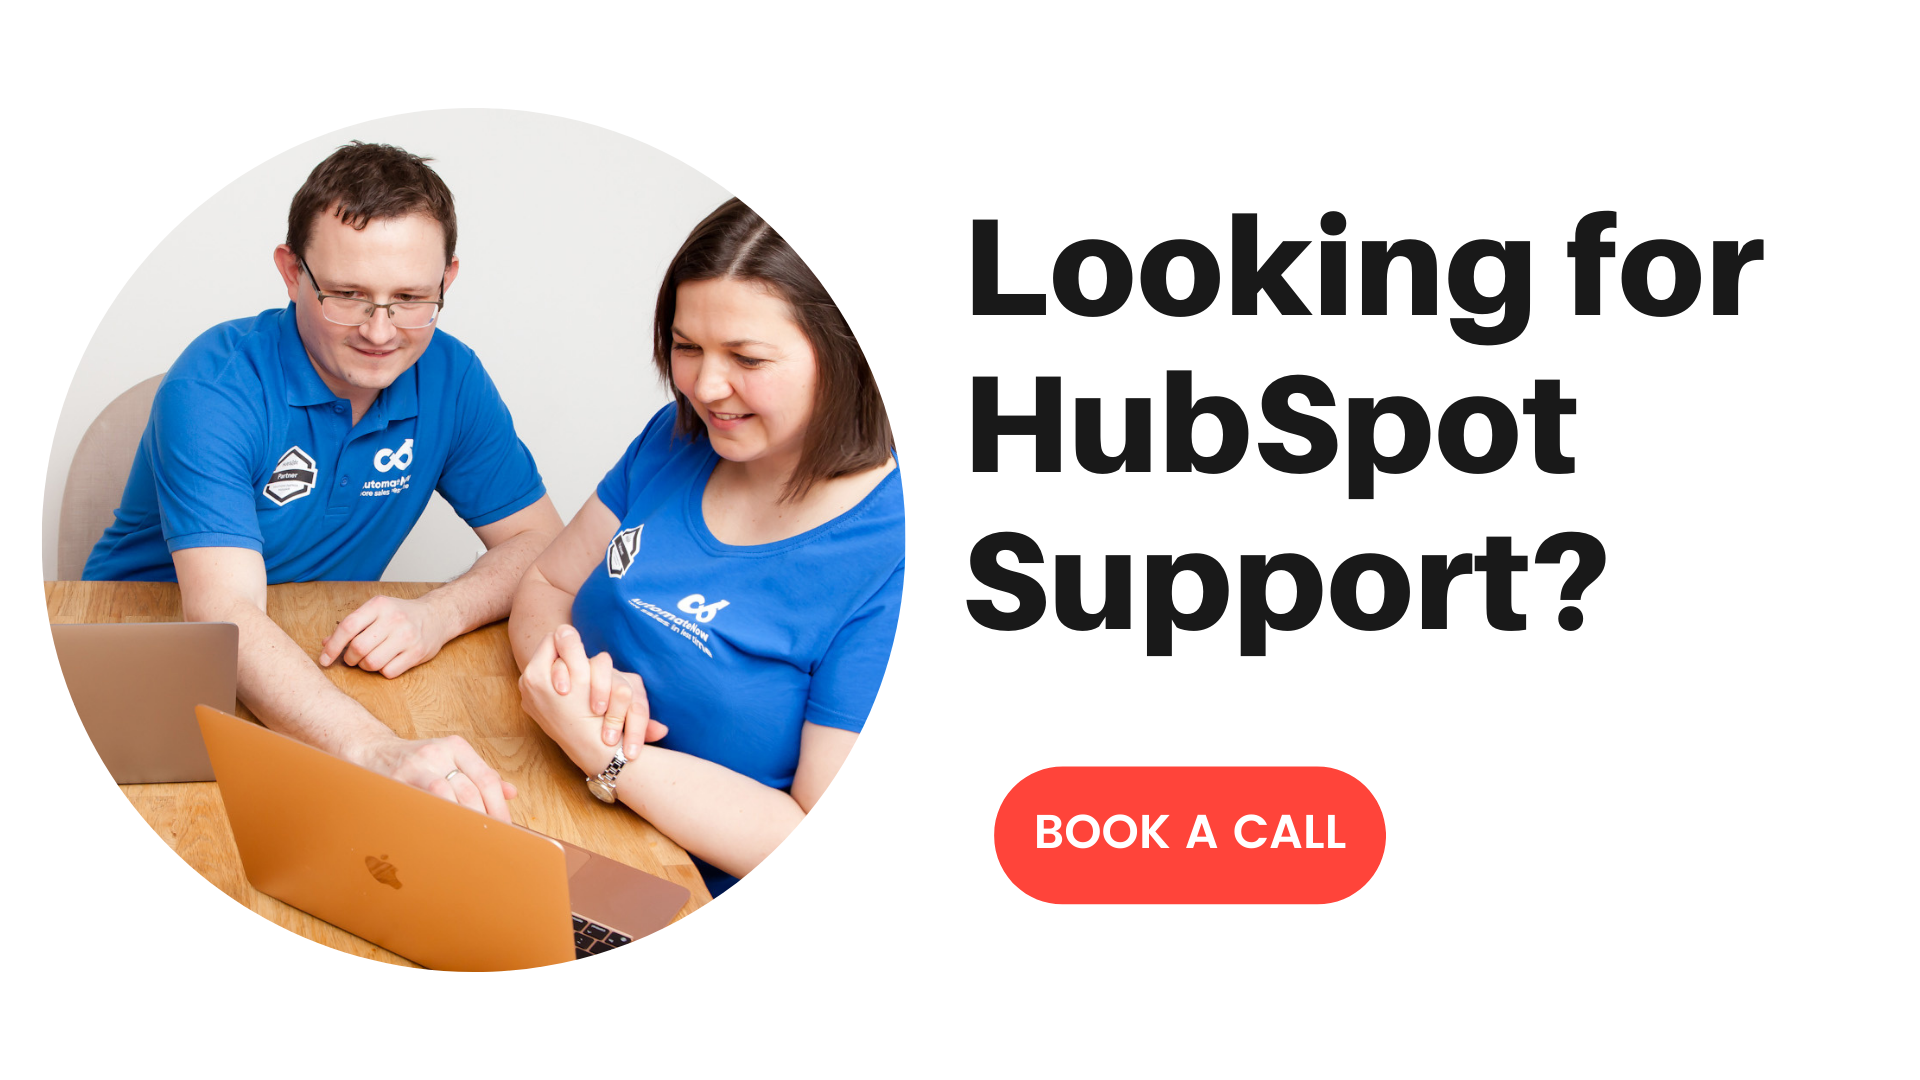 Looking for HubSpot Support?